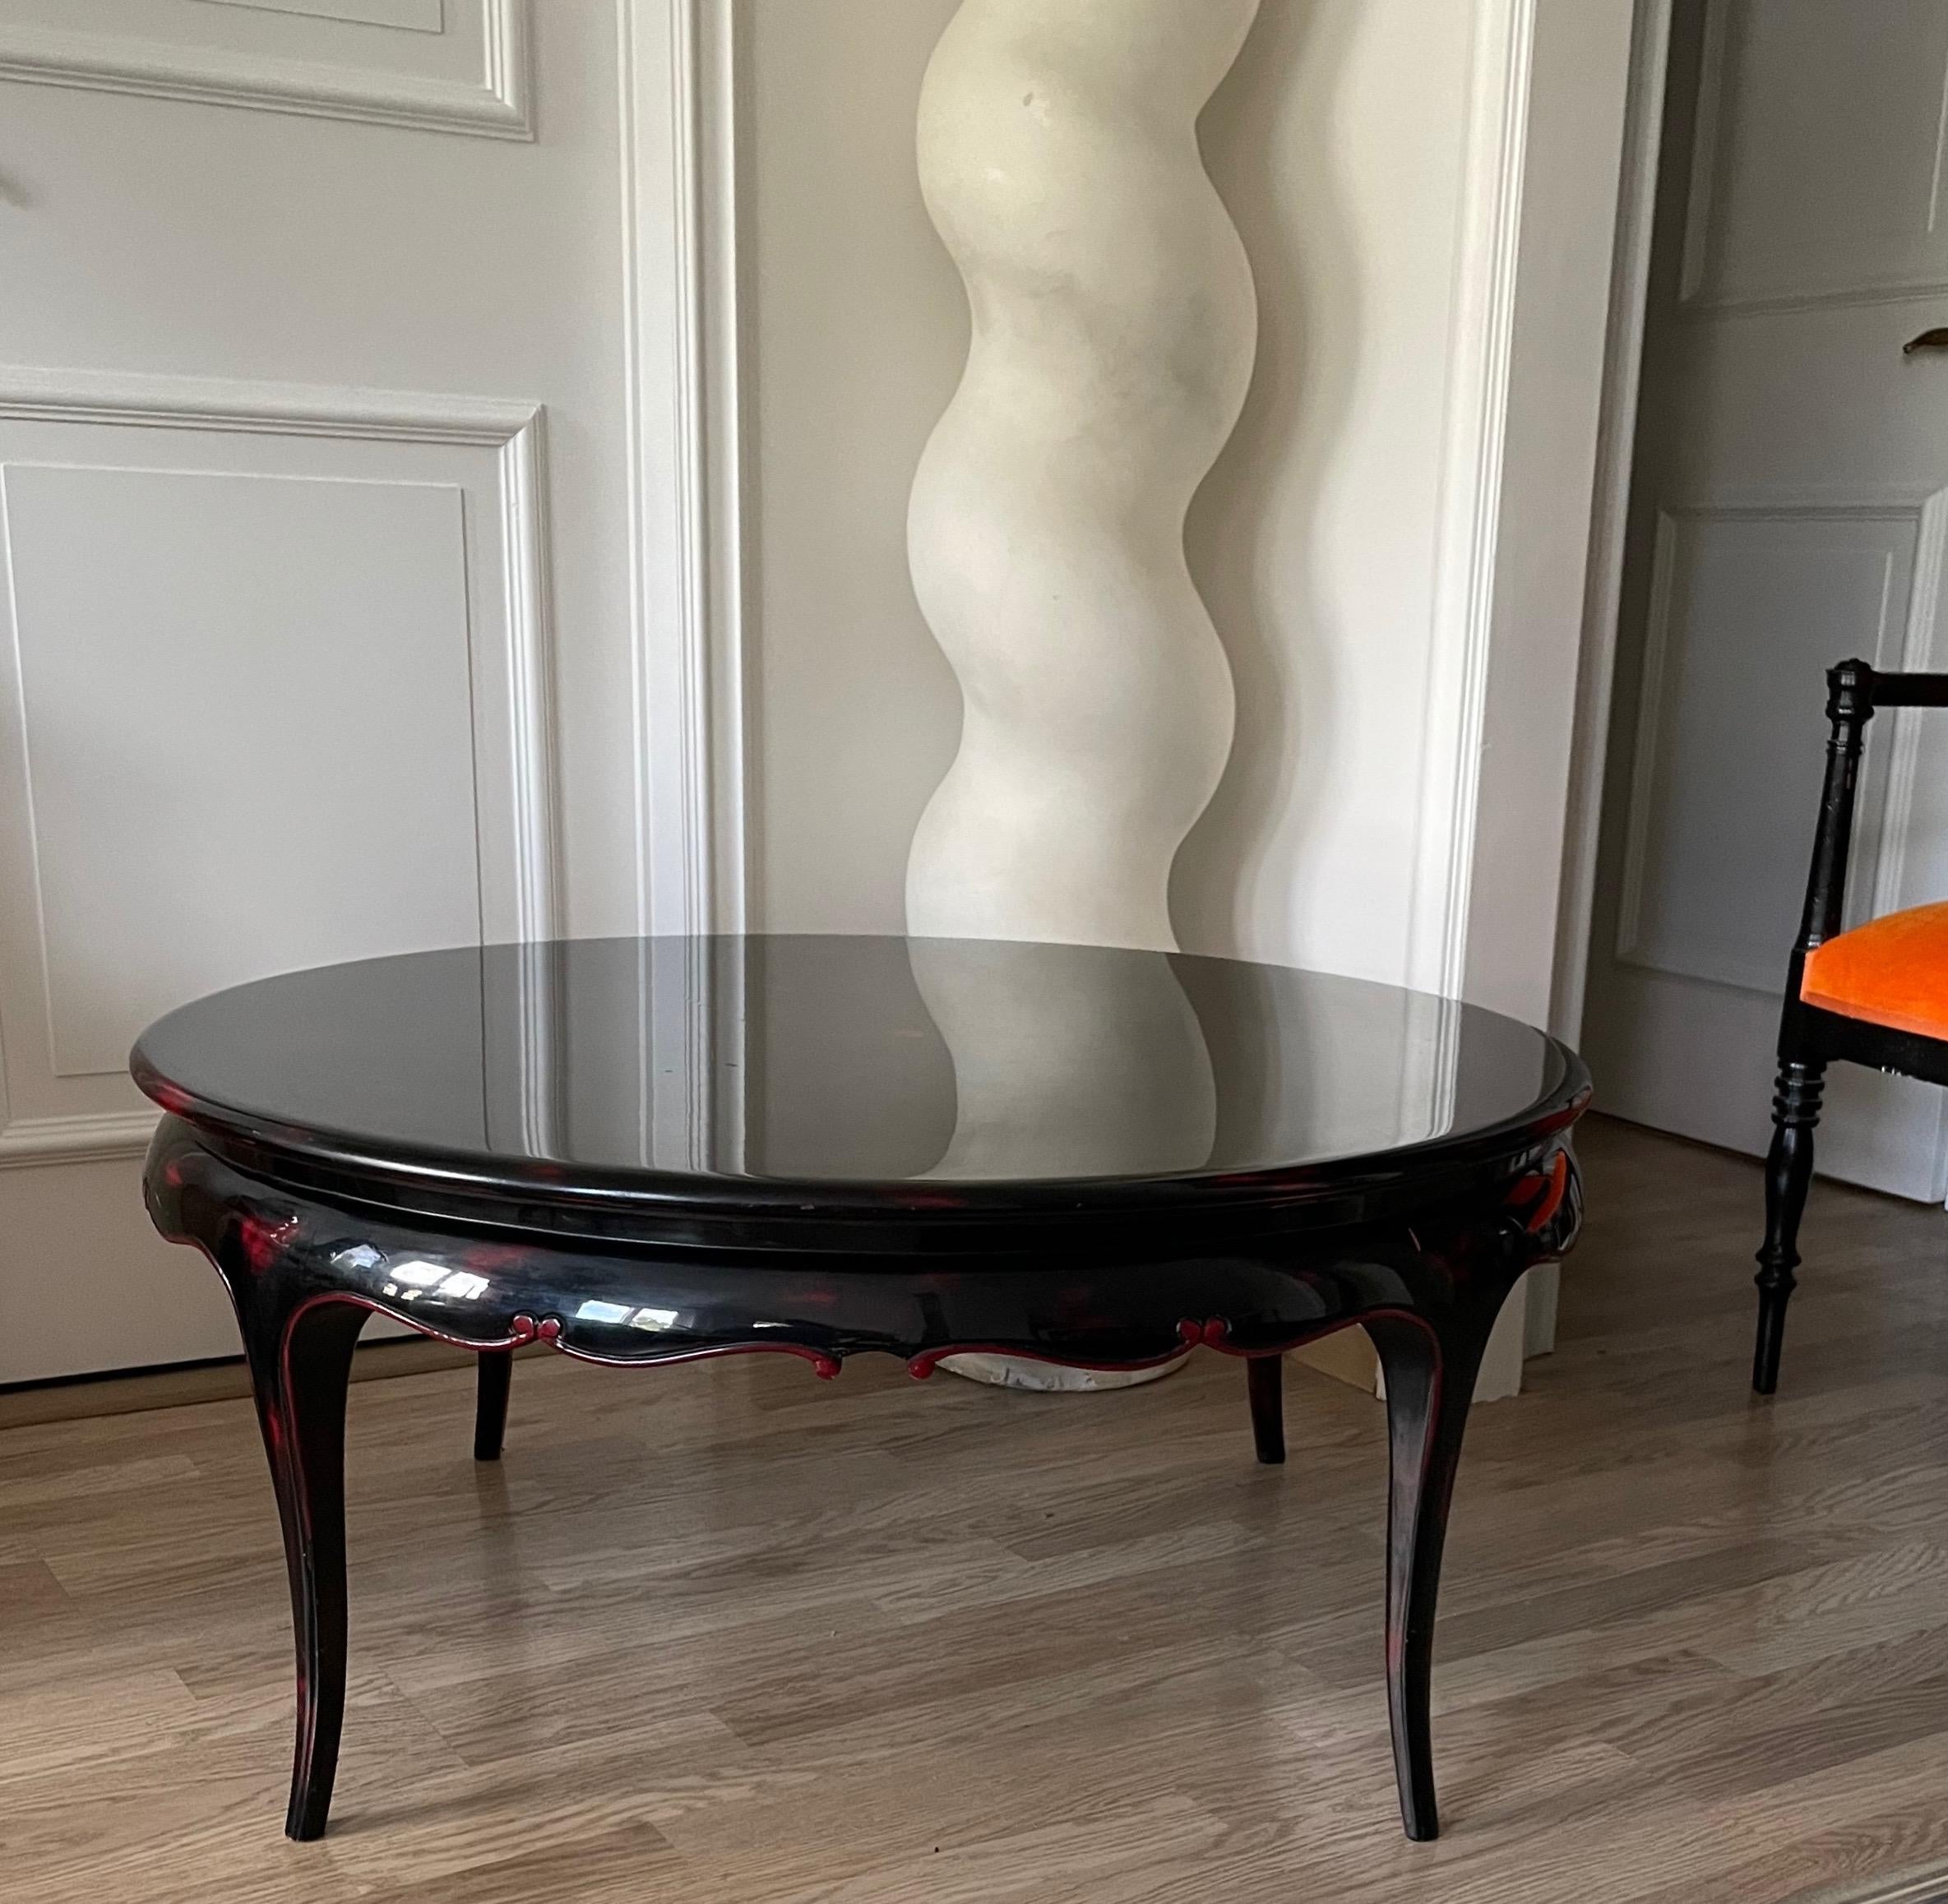 Elegant art deco black lacquer circular coffee table.
Designed by Maurice Rinck.
France 1930.